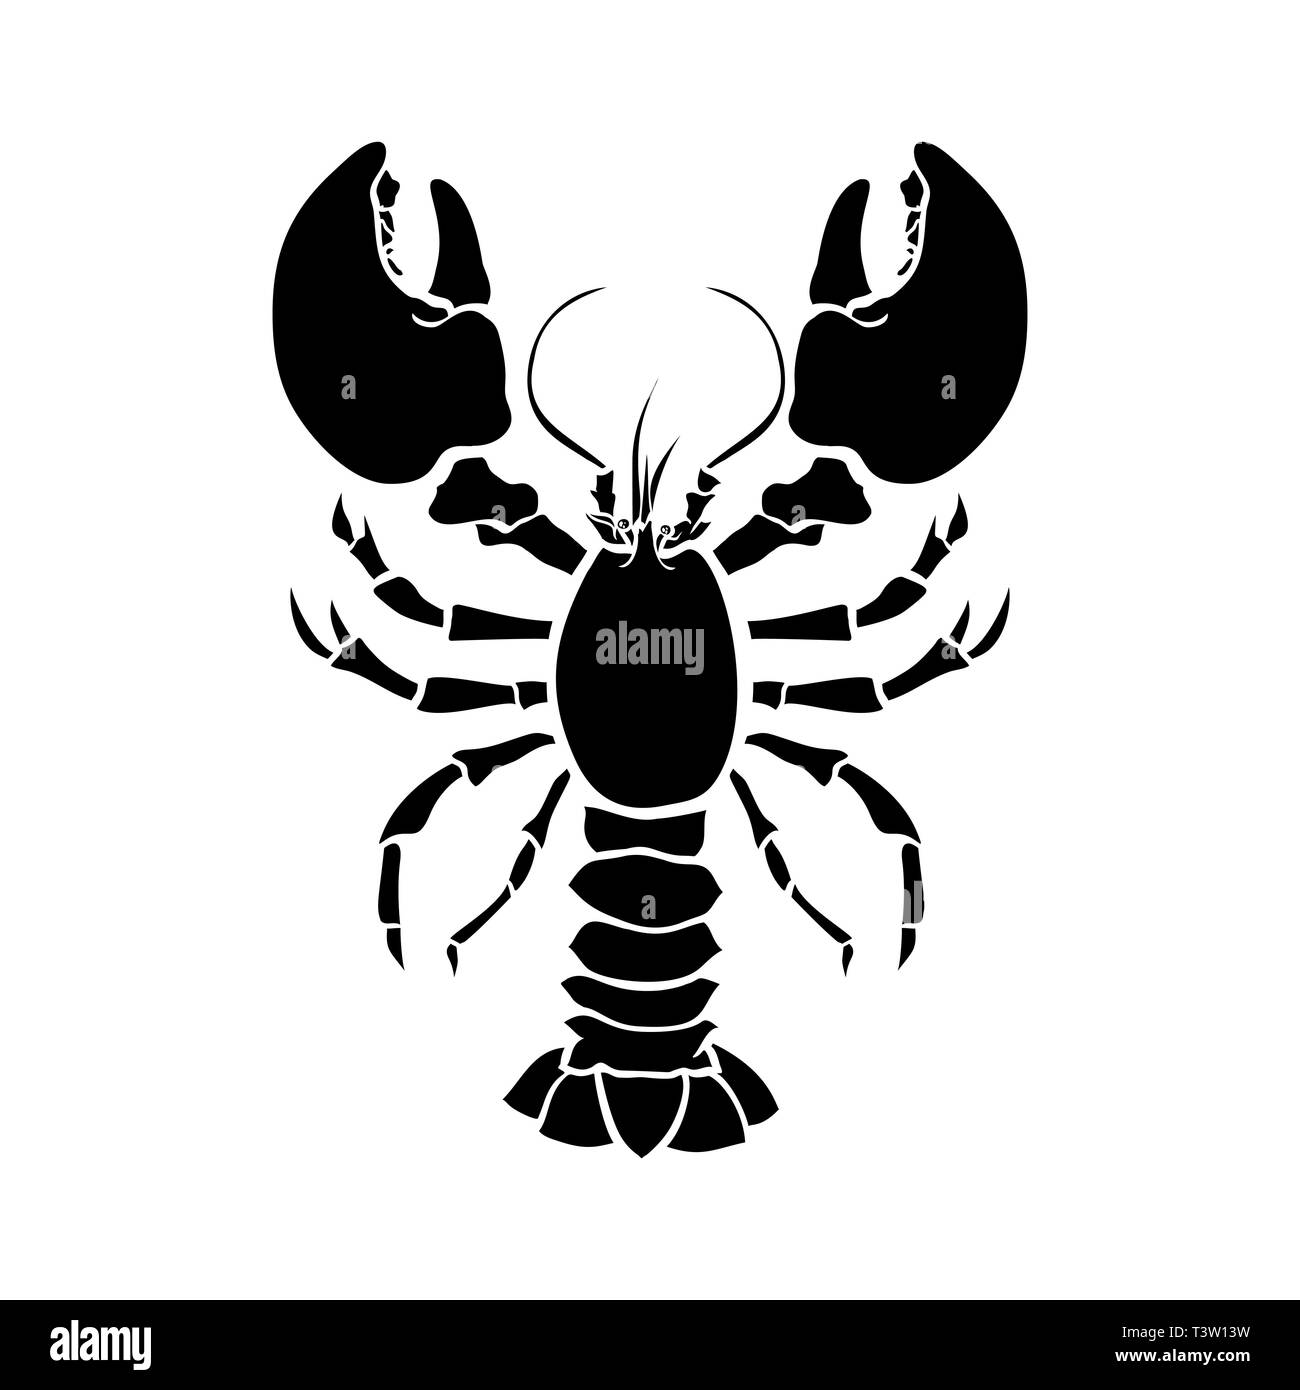 Lobster, crustacean silhouette vector drawing. Crayfish hand drawn illustration. Seafood restaurant delicacy minimalistic pictogram. Sealife, underwater biology isolated design element Stock Vector